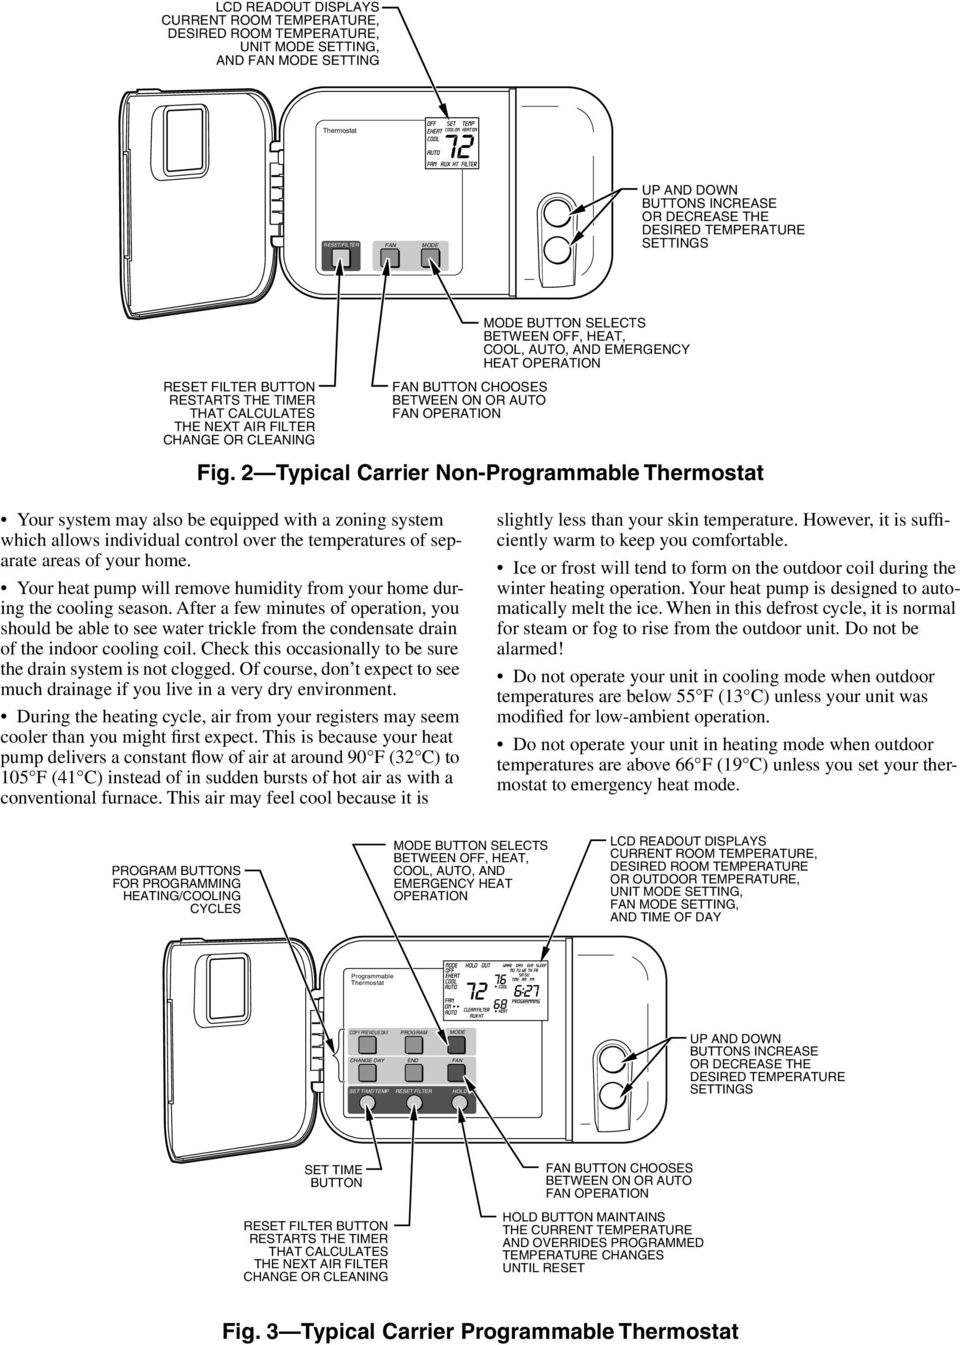 HEAT, COOL, AUTO, AND EMERGENCY HEAT OPERATION Fig.